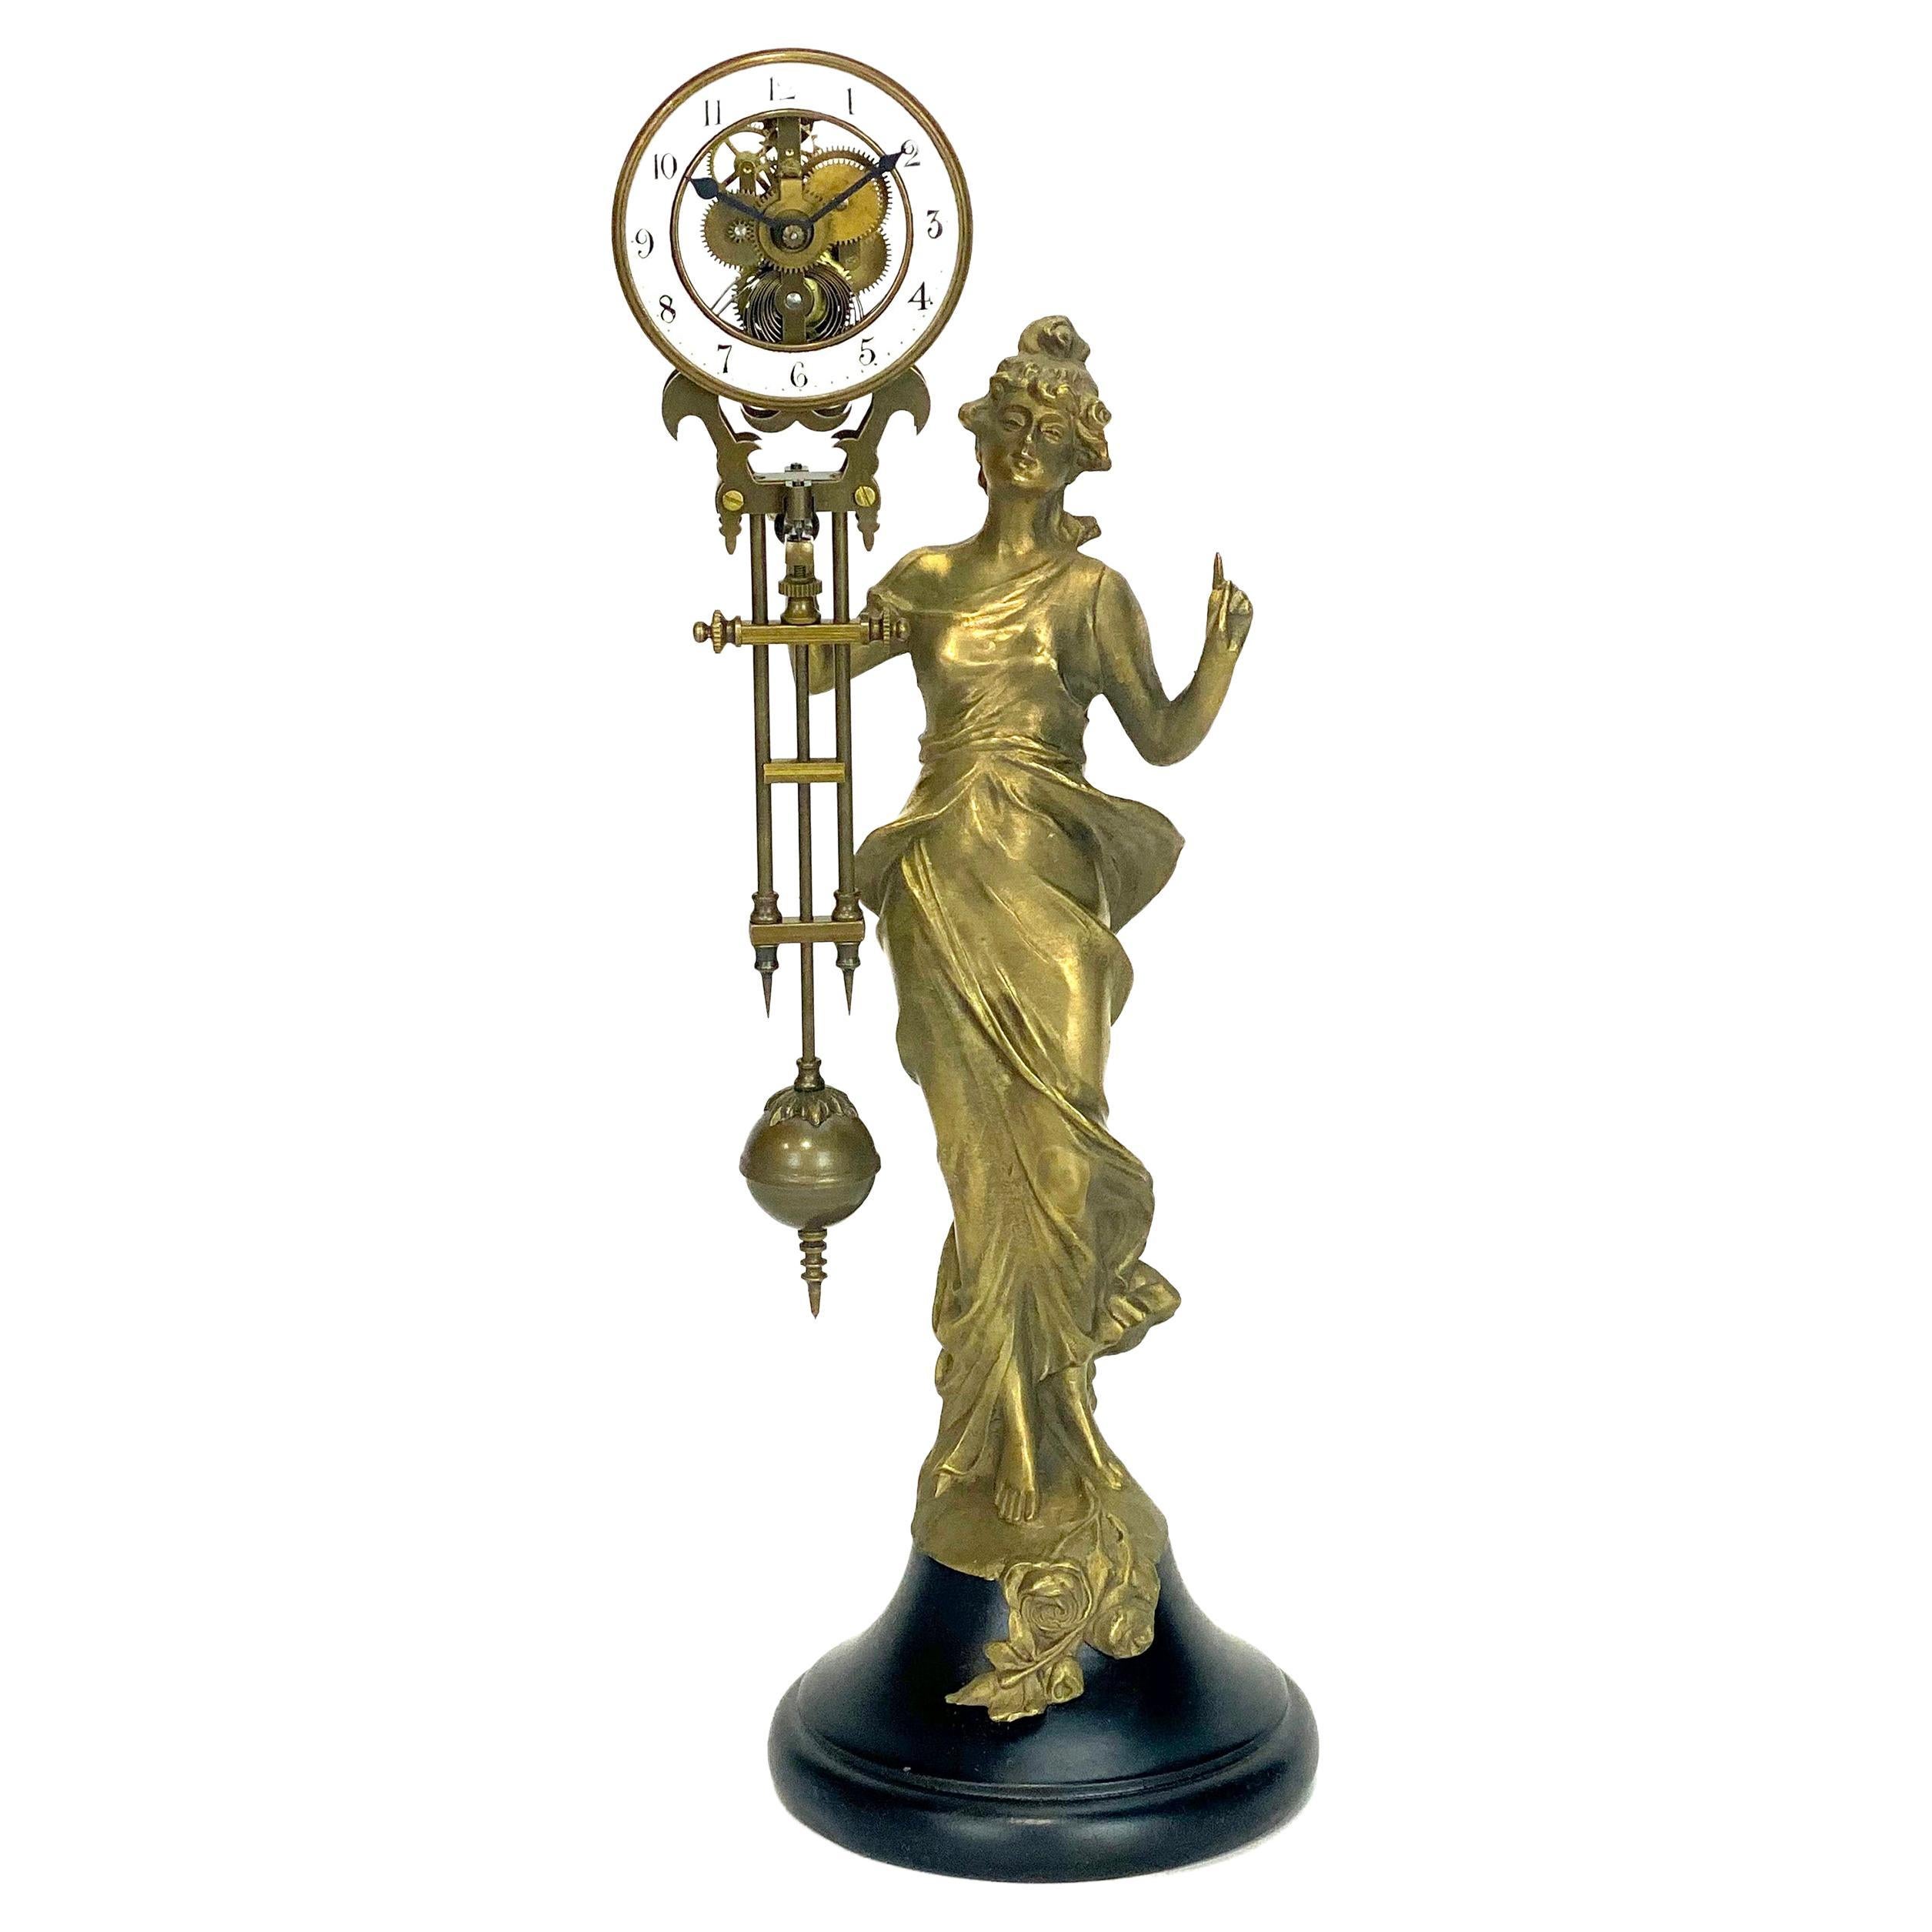 Mystery Brass Diana Figure Swinging Clock with 8 Day Skeleton Movement